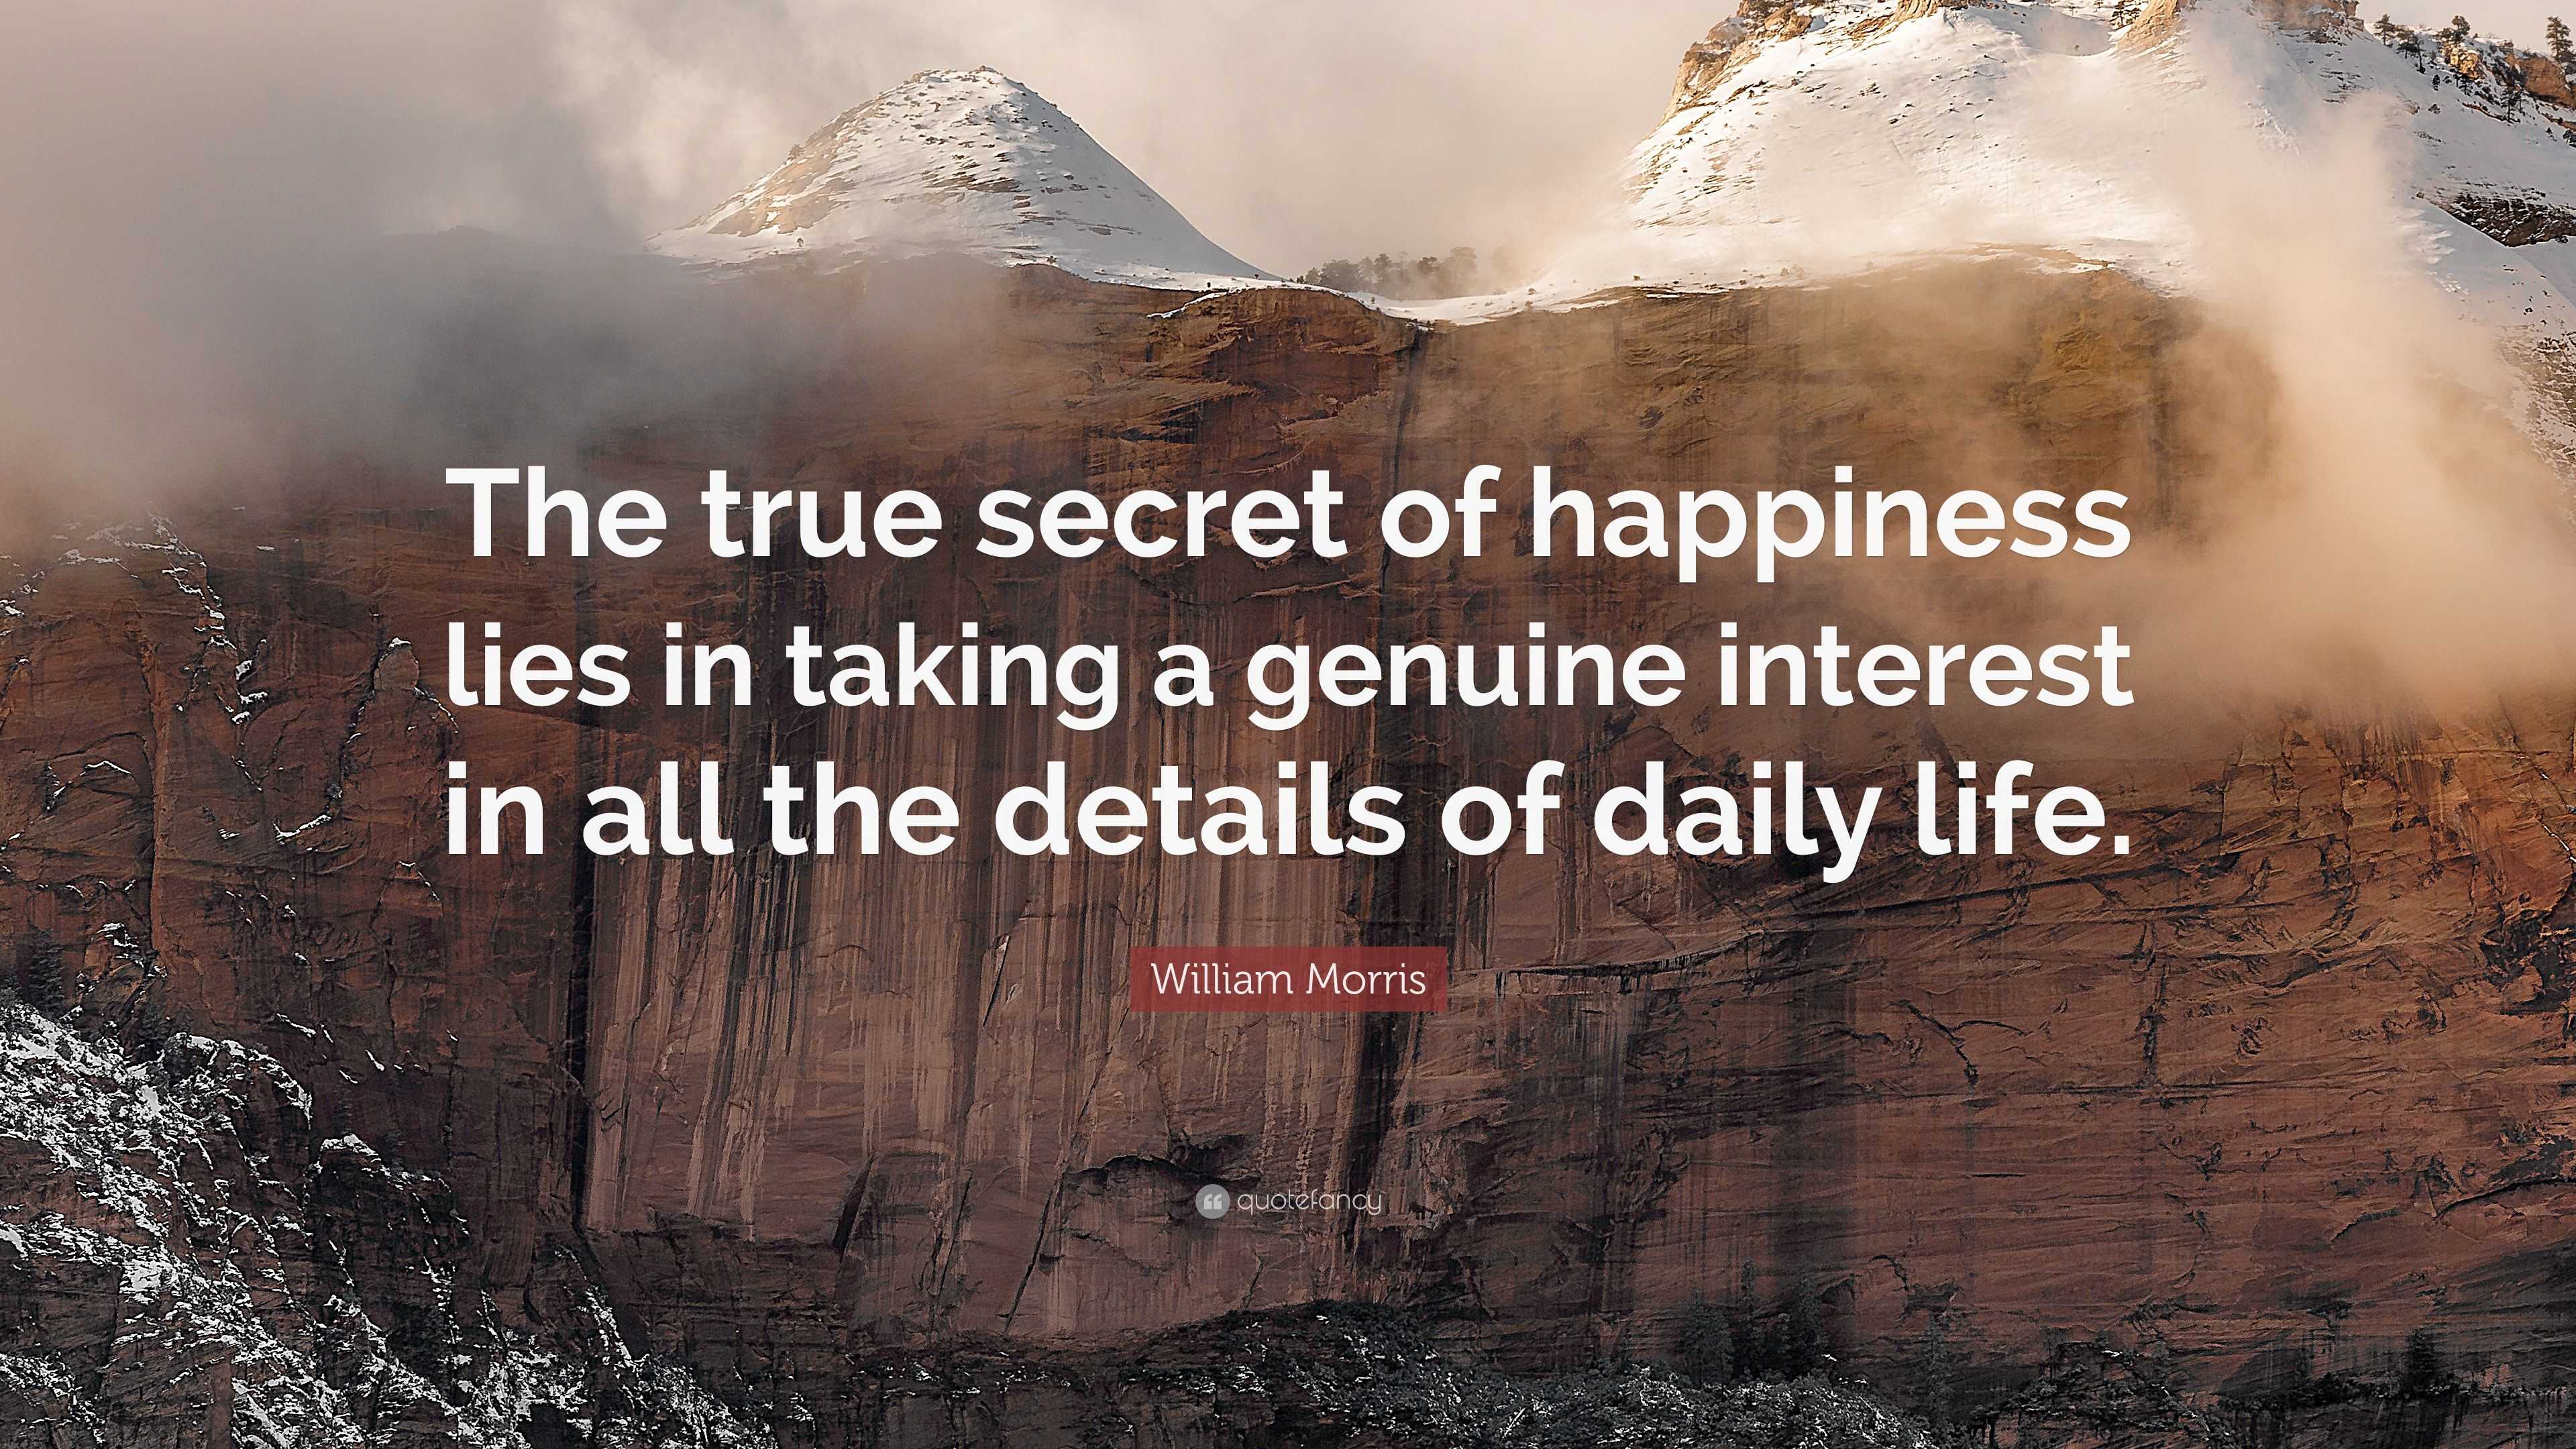 William Morris Quote: “The true secret of happiness lies in taking a ...